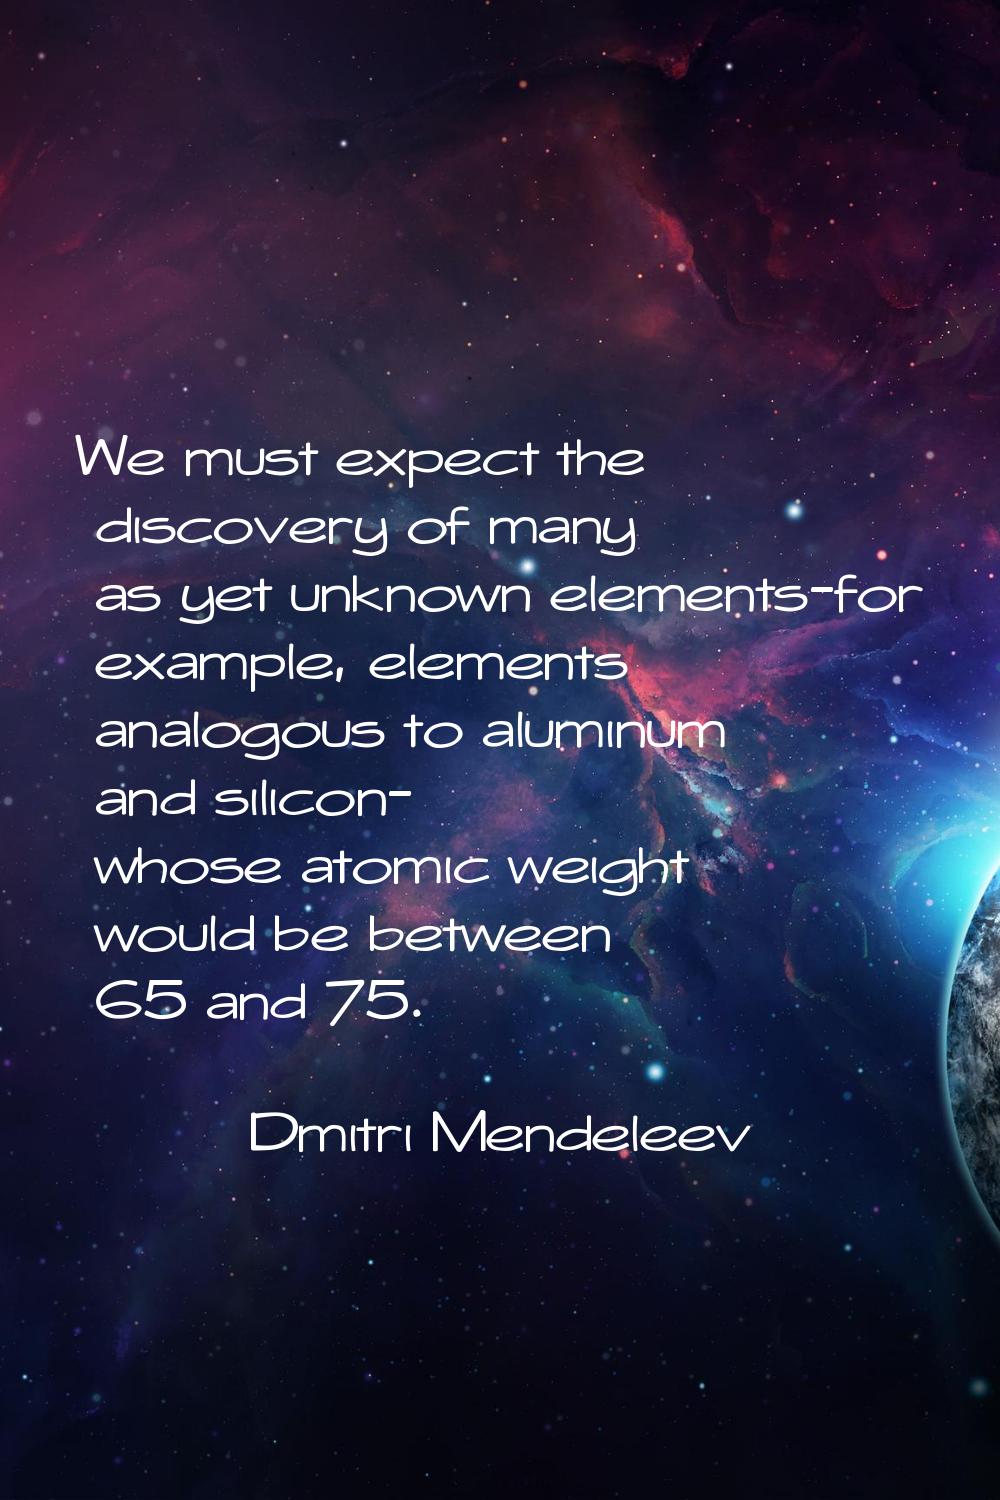 We must expect the discovery of many as yet unknown elements-for example, elements analogous to alu